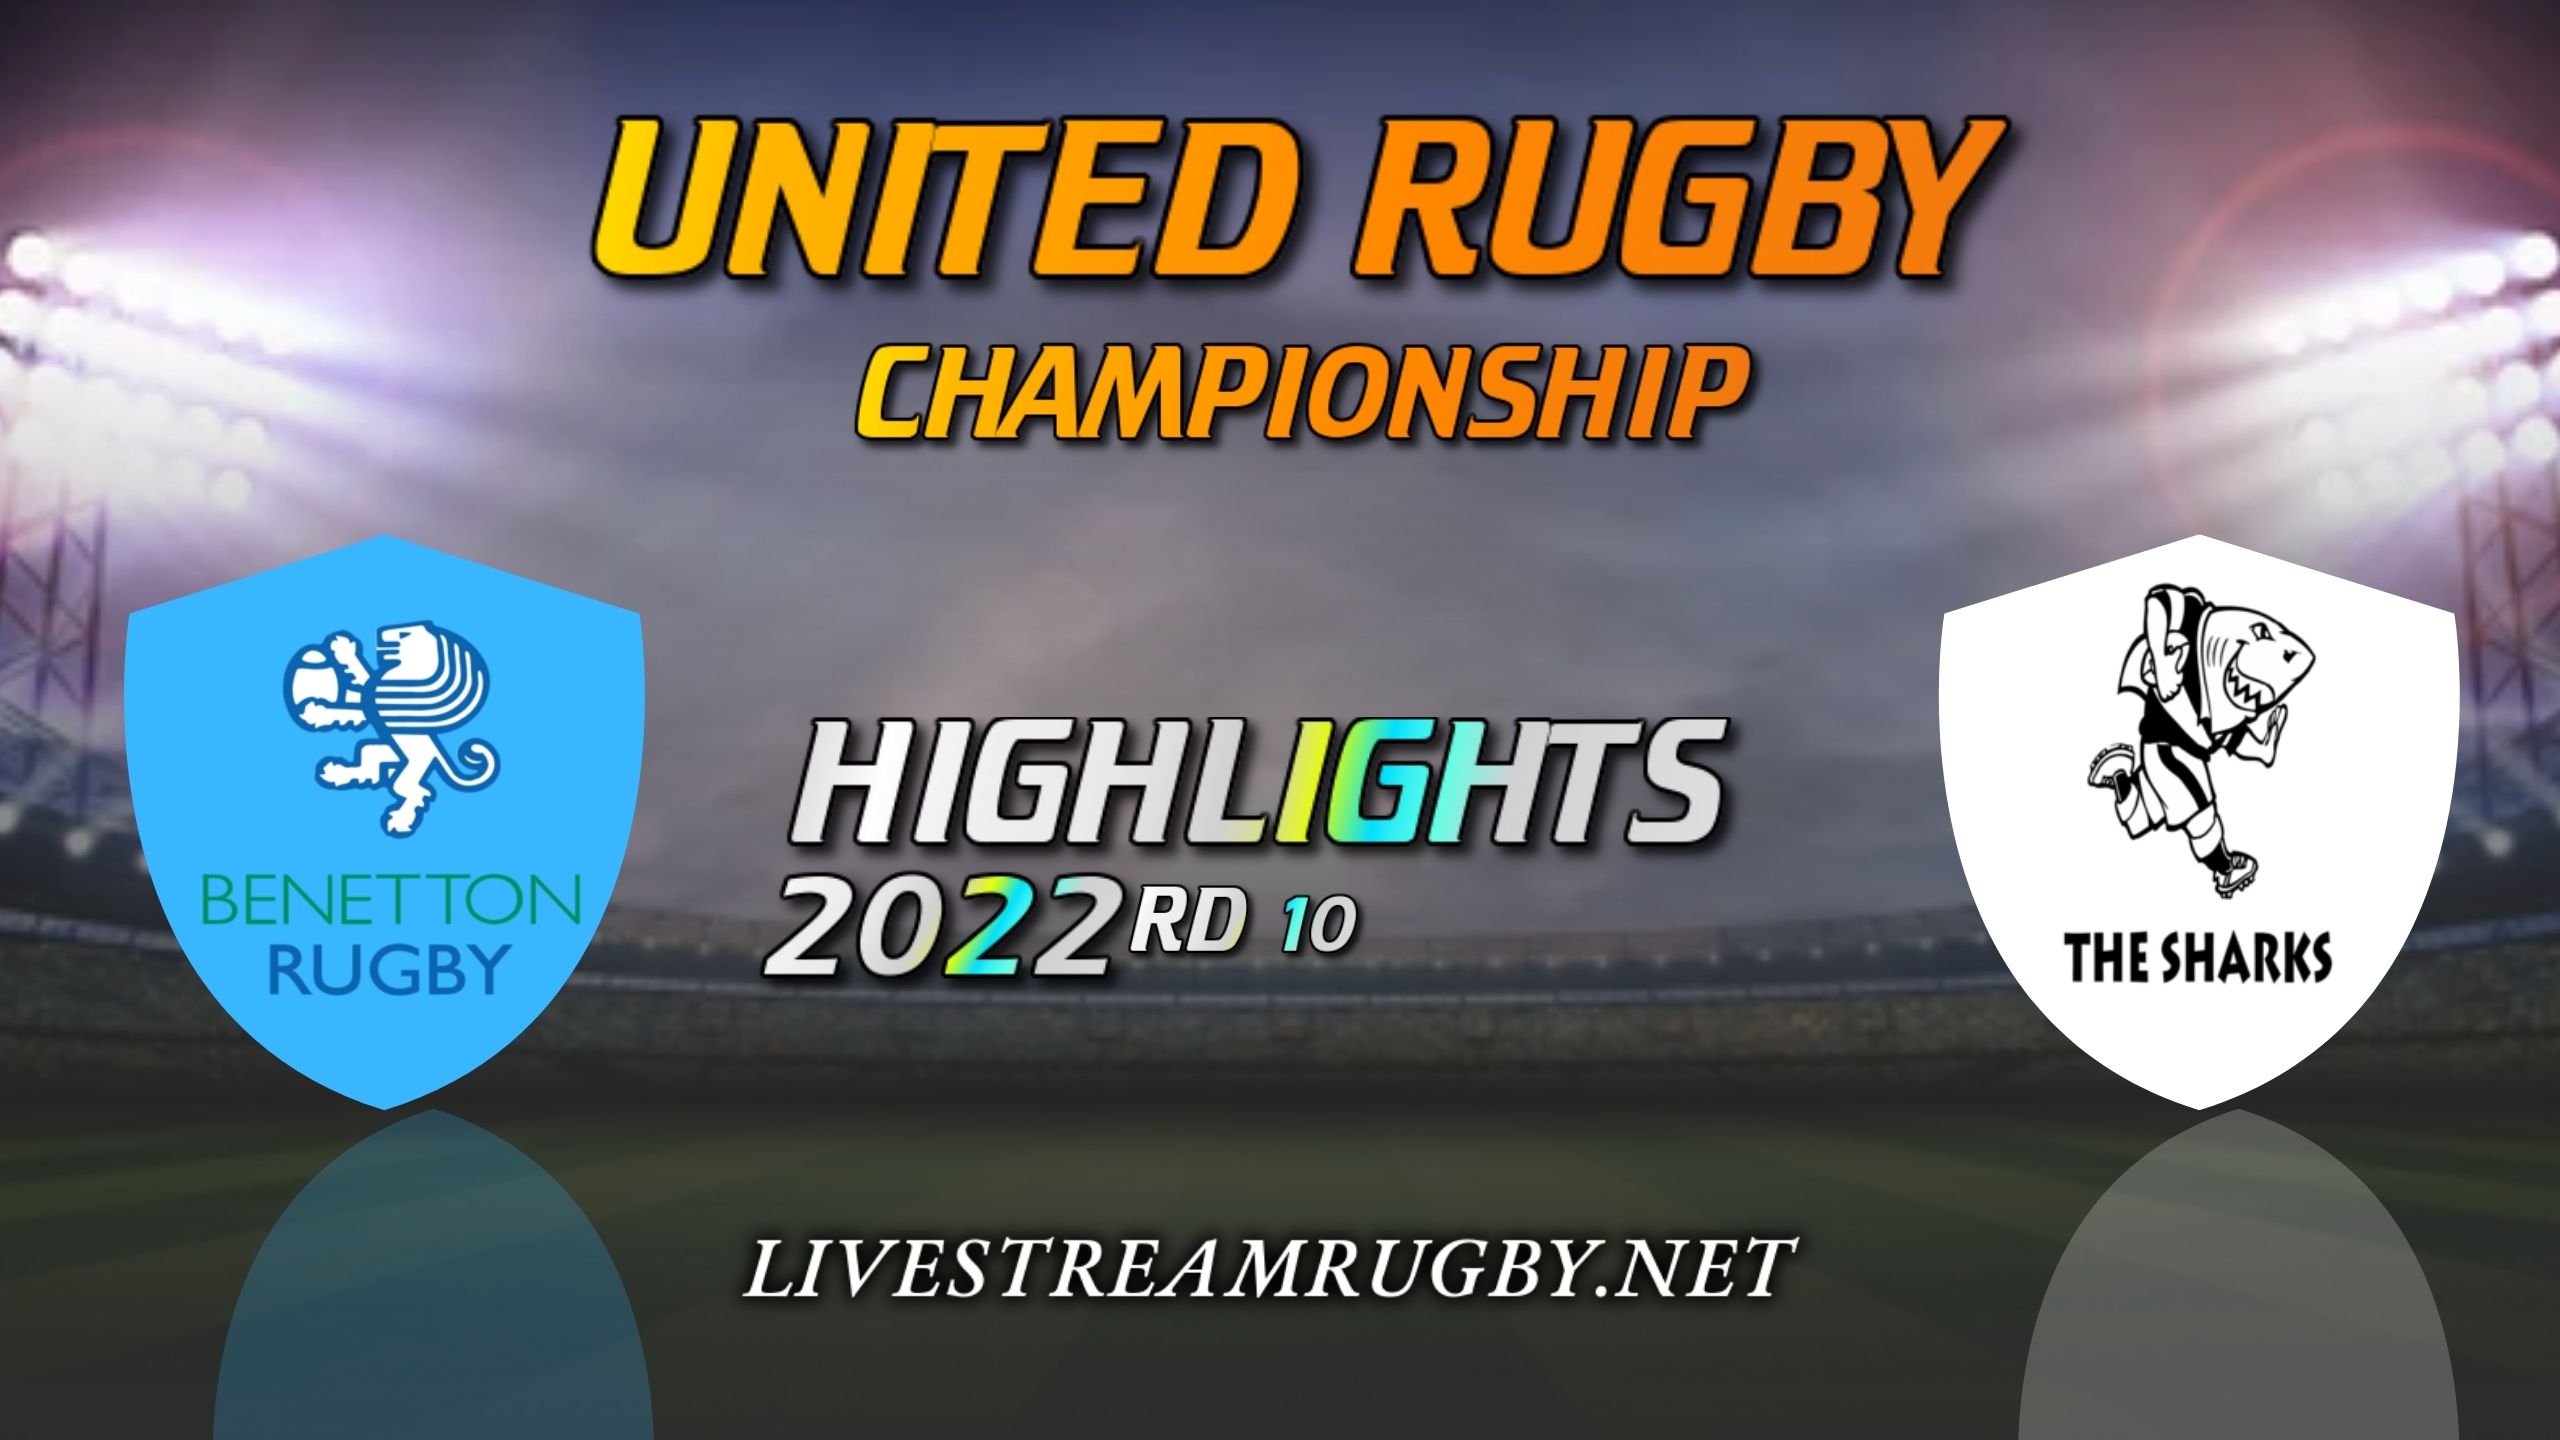 Benetton Vs Sharks Highlights 2022 Rd 10 United Rugby